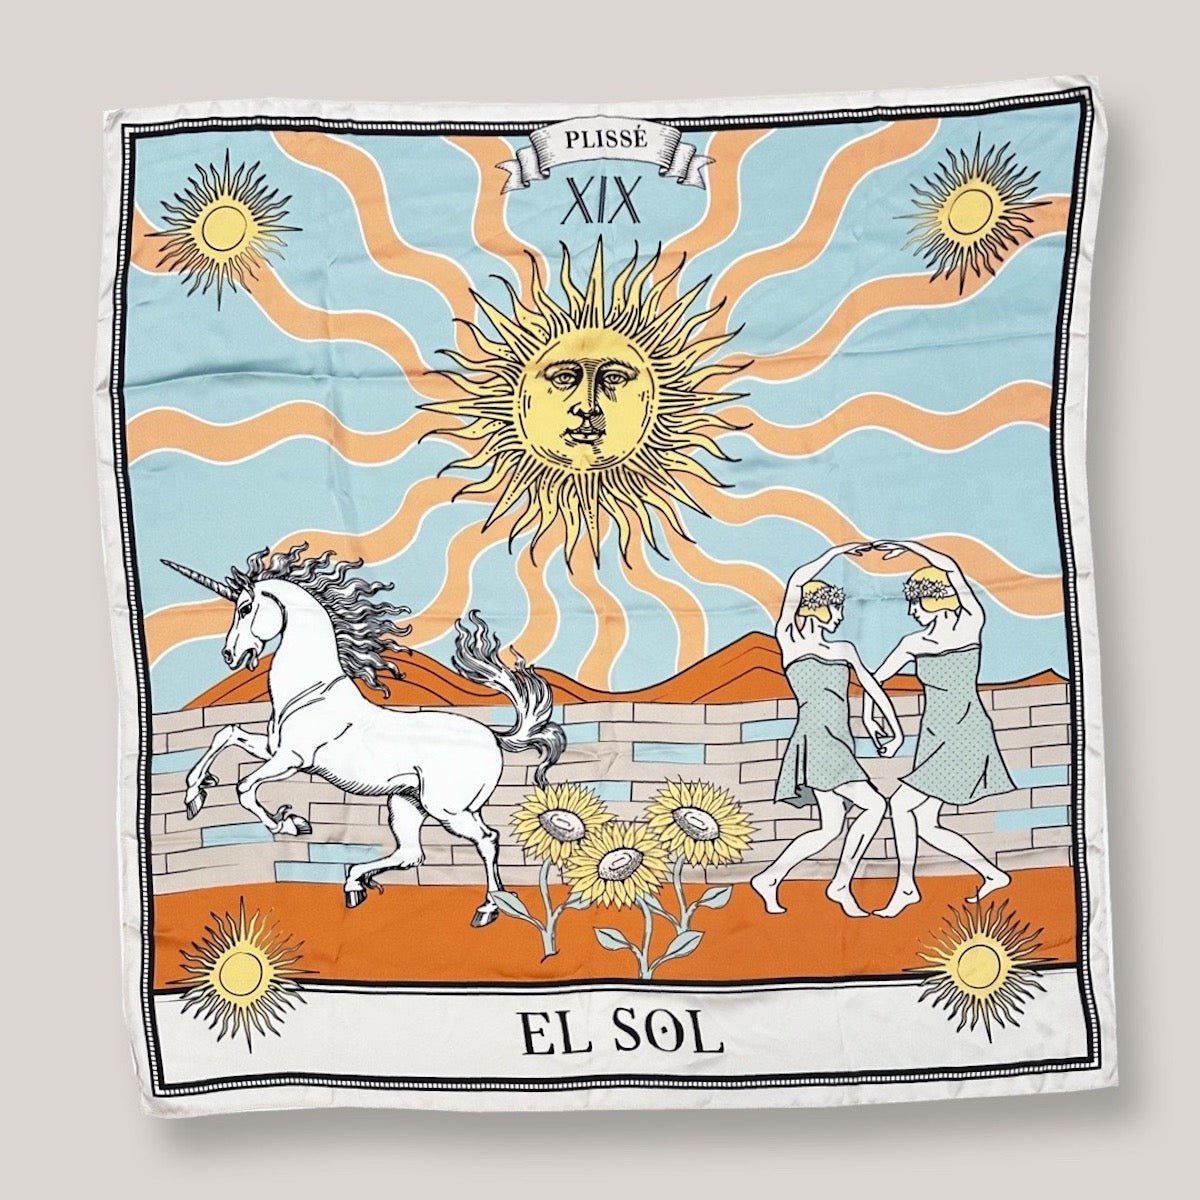 Beautiful sun scarf by Plisse, Image includes sunbursts at each corner, sunflowers in vibrant orange and baby blue tones, and playful elements like a unicorn and dancing figures on plain white background